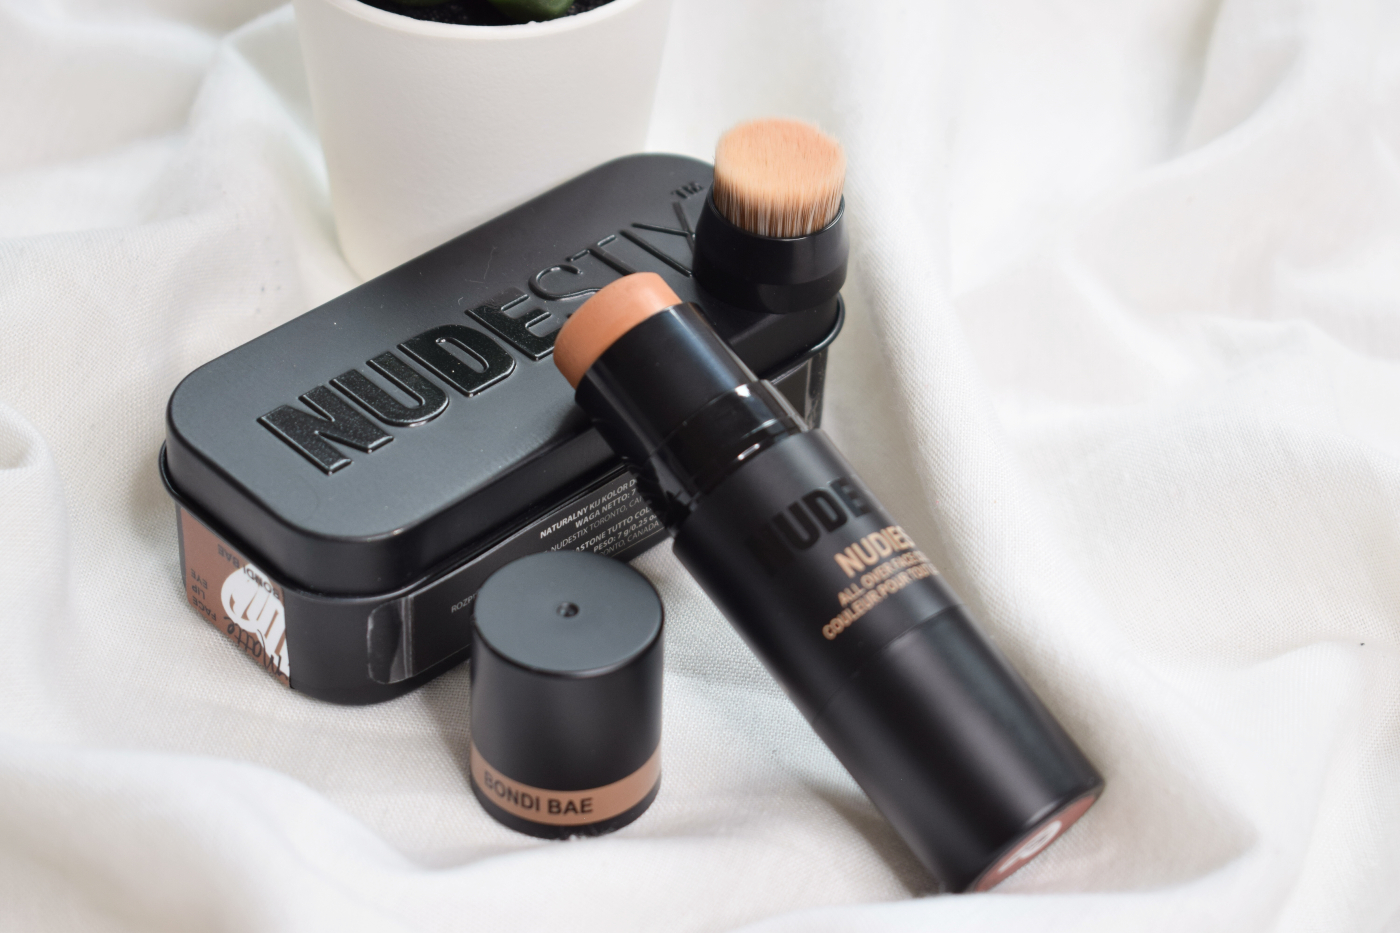 nudestix-all-over-face-color-bondi-bae-review-swatches (1).jpg